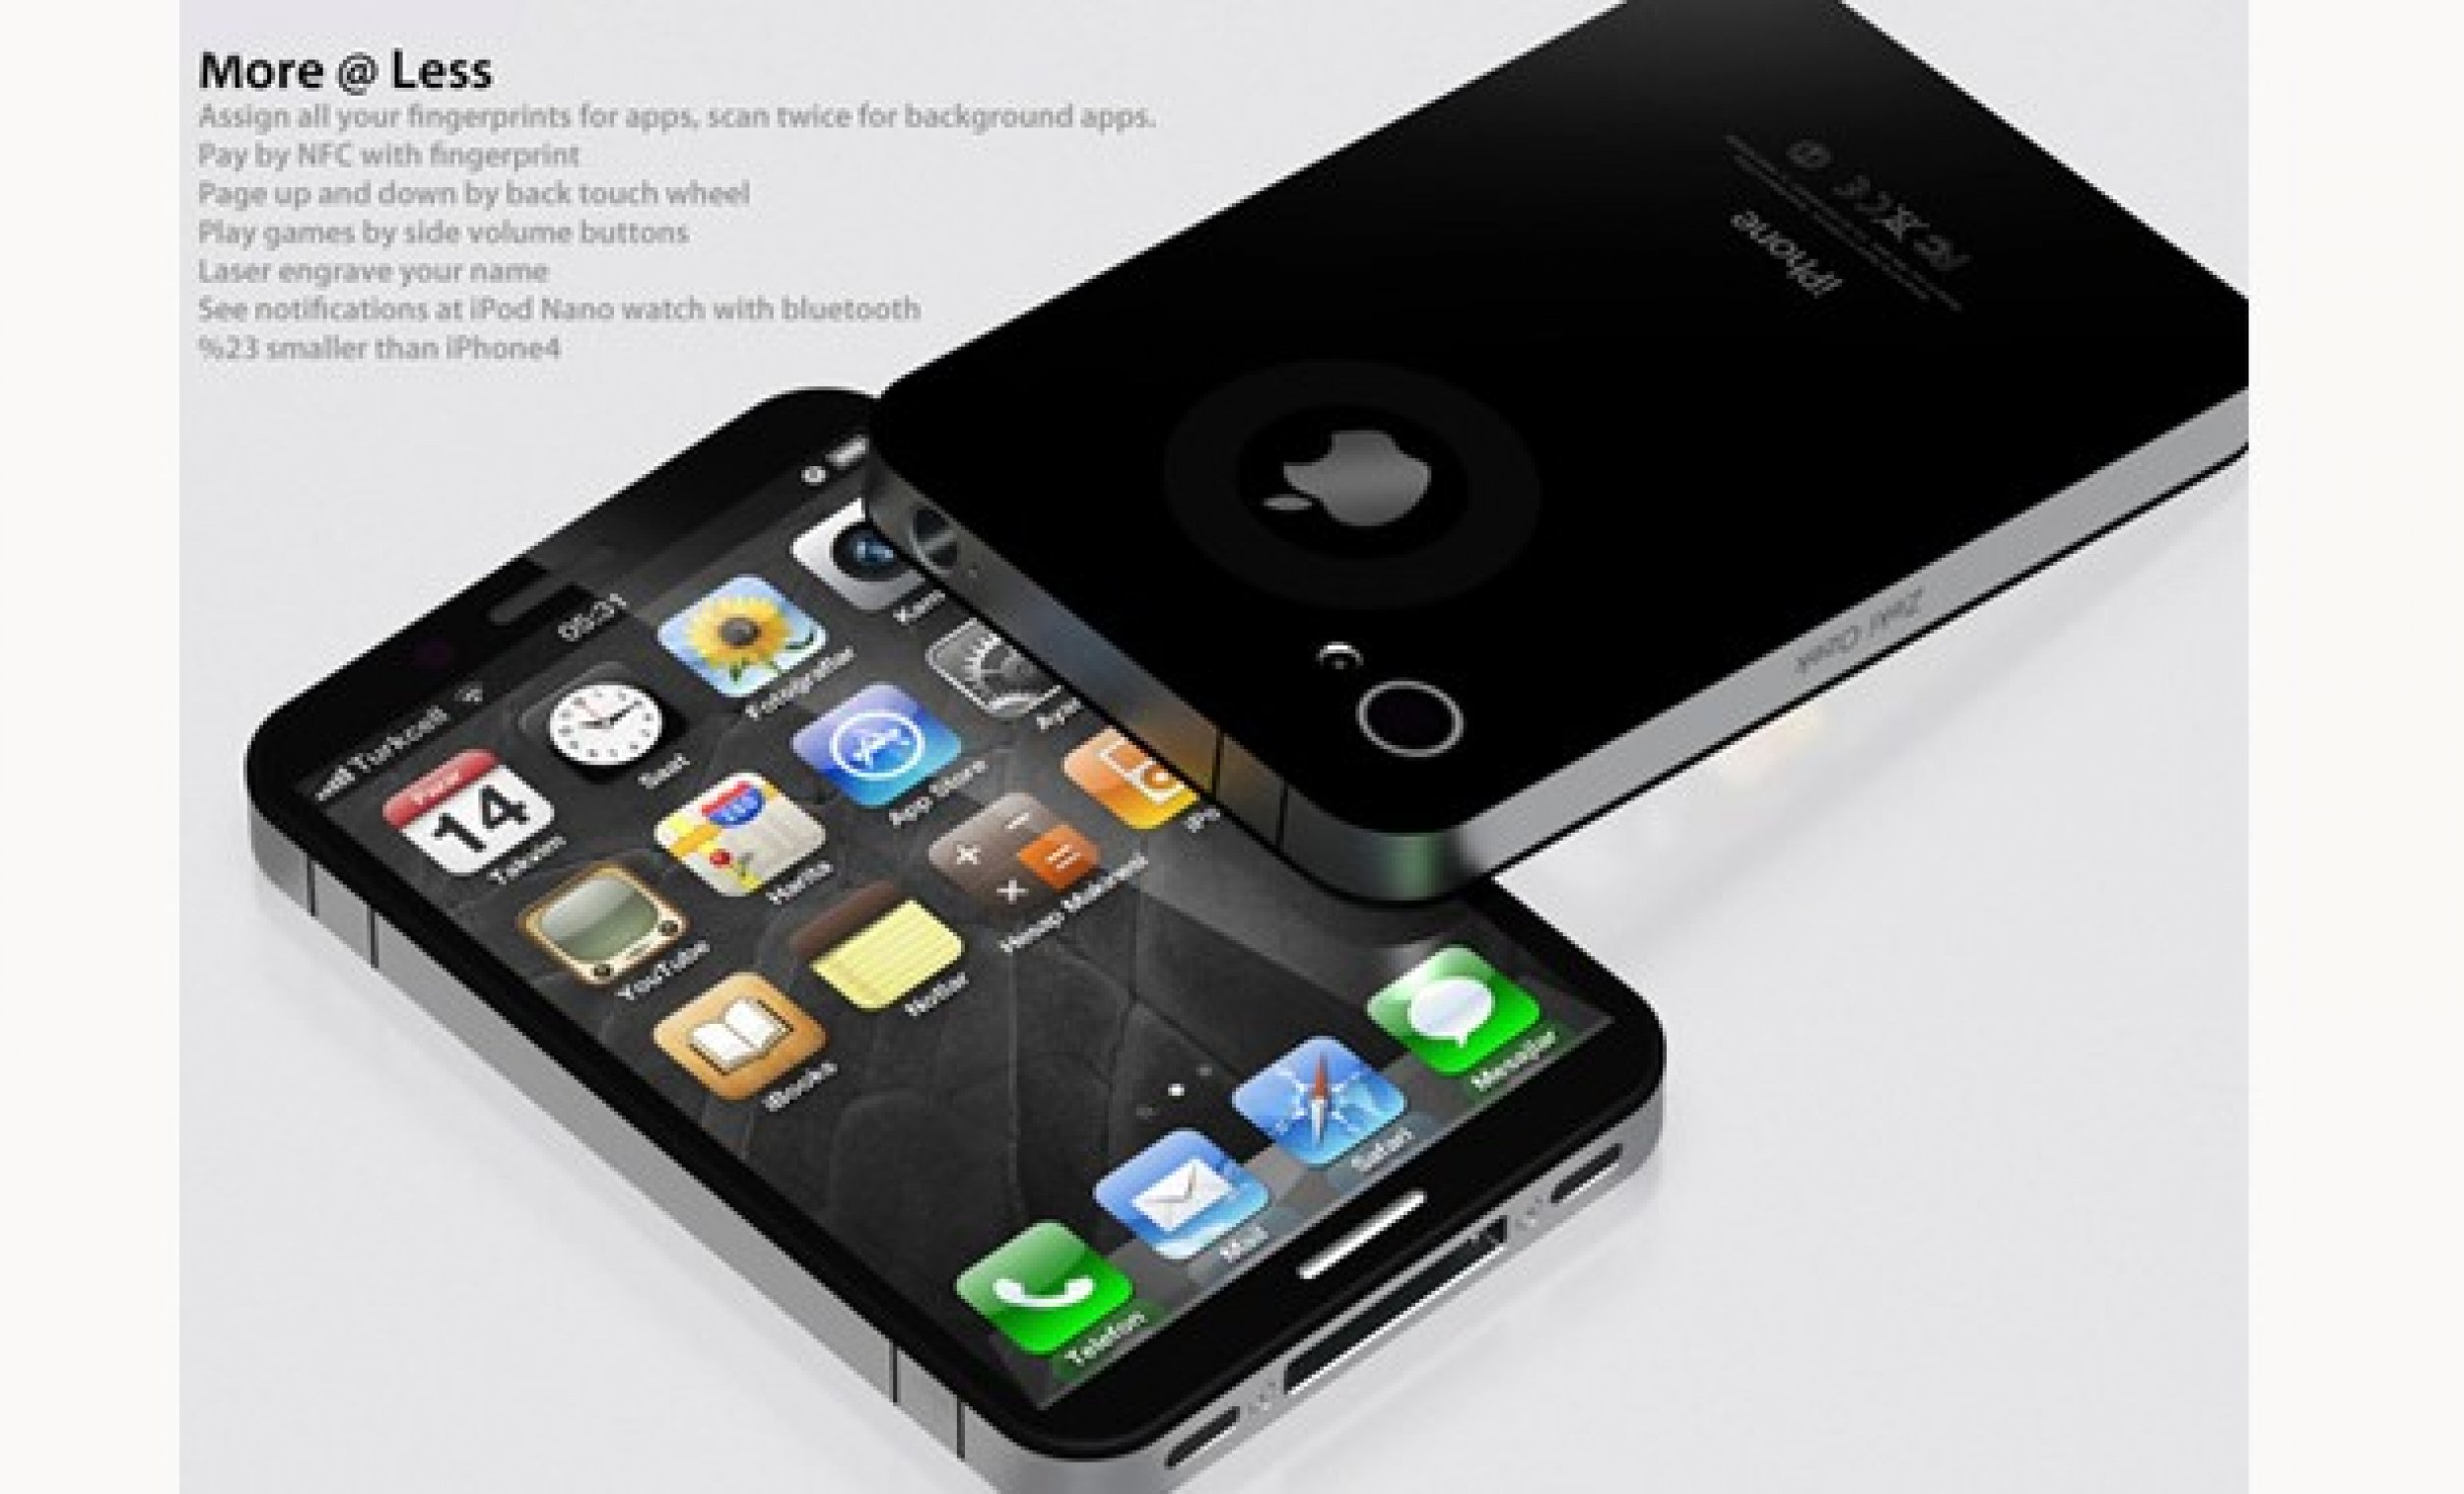 IPhone 5 Release Date Approaches Will Apples Mini Tablet Outshine The Next Generation Smartphone SPECS 